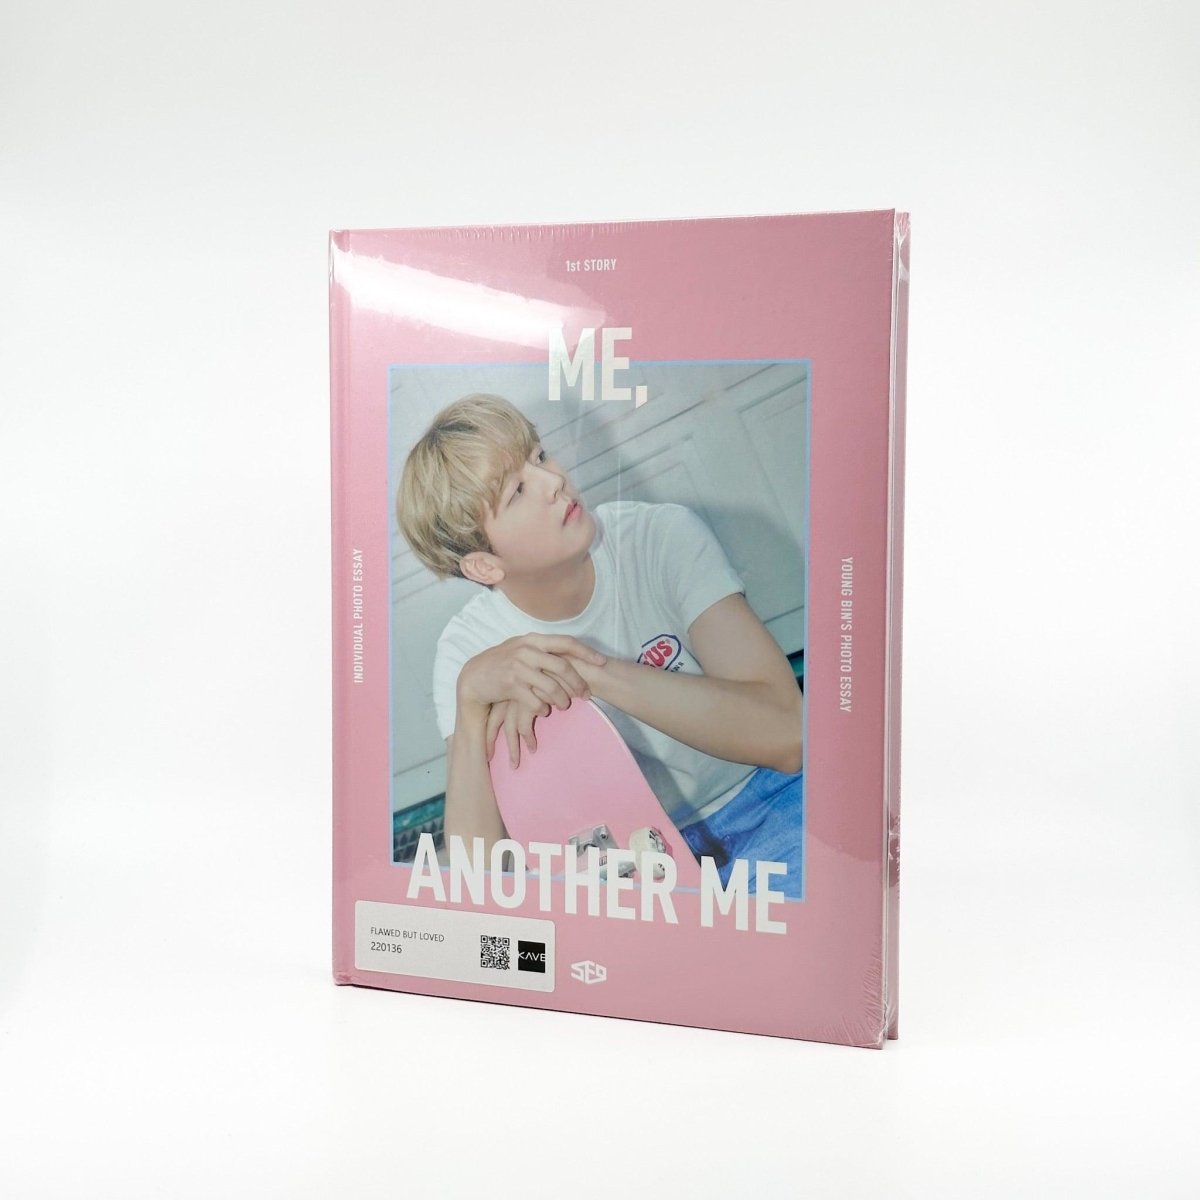 SF9 - YOUNG BIN'S PHOTO ESSAY [ME, ANOTHER ME] FLAWED 220136 - KAVE SQUARE